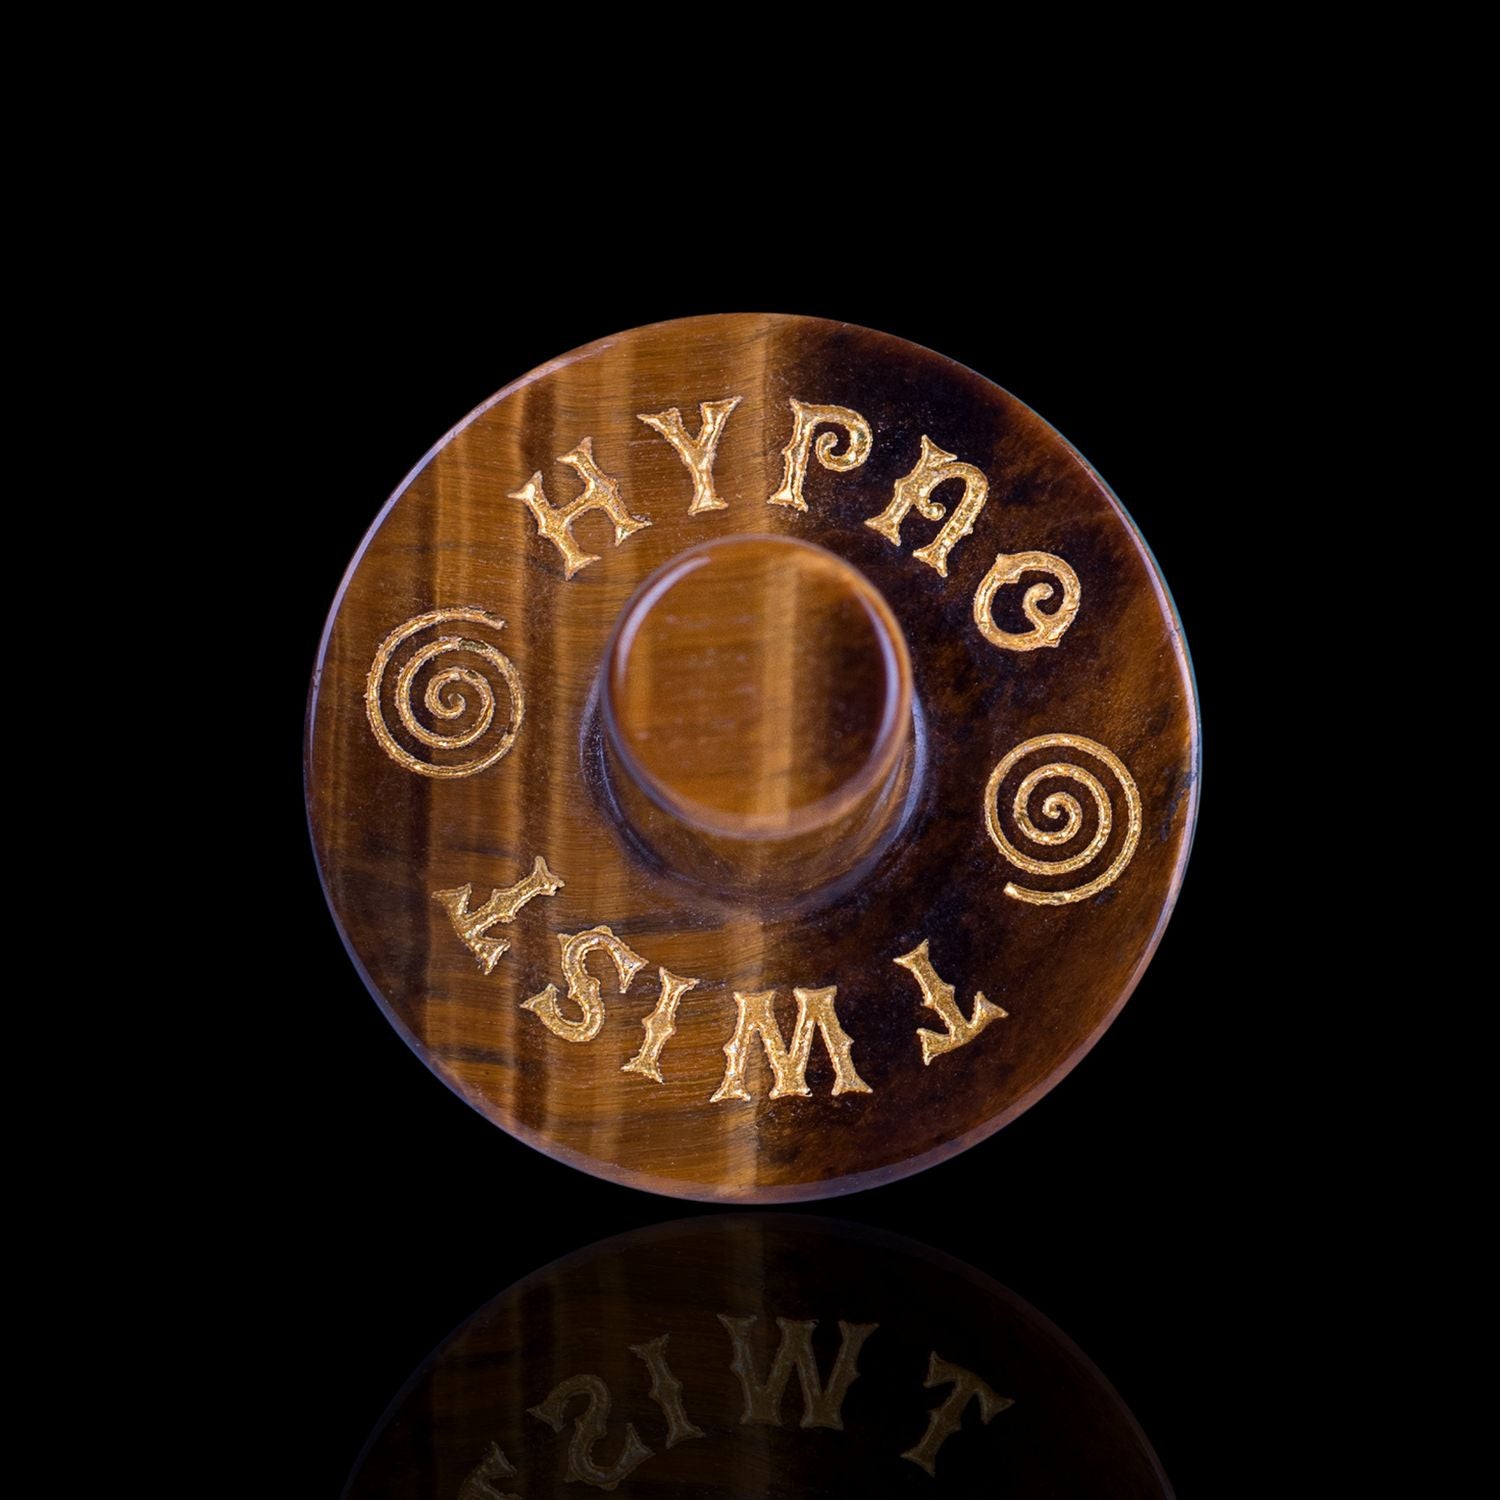 Front View Of The Naturally Wicked Exclusive Hypnotwister. A Tiger's Eye Crystal Spinning Top Engraved With Hypno Twist